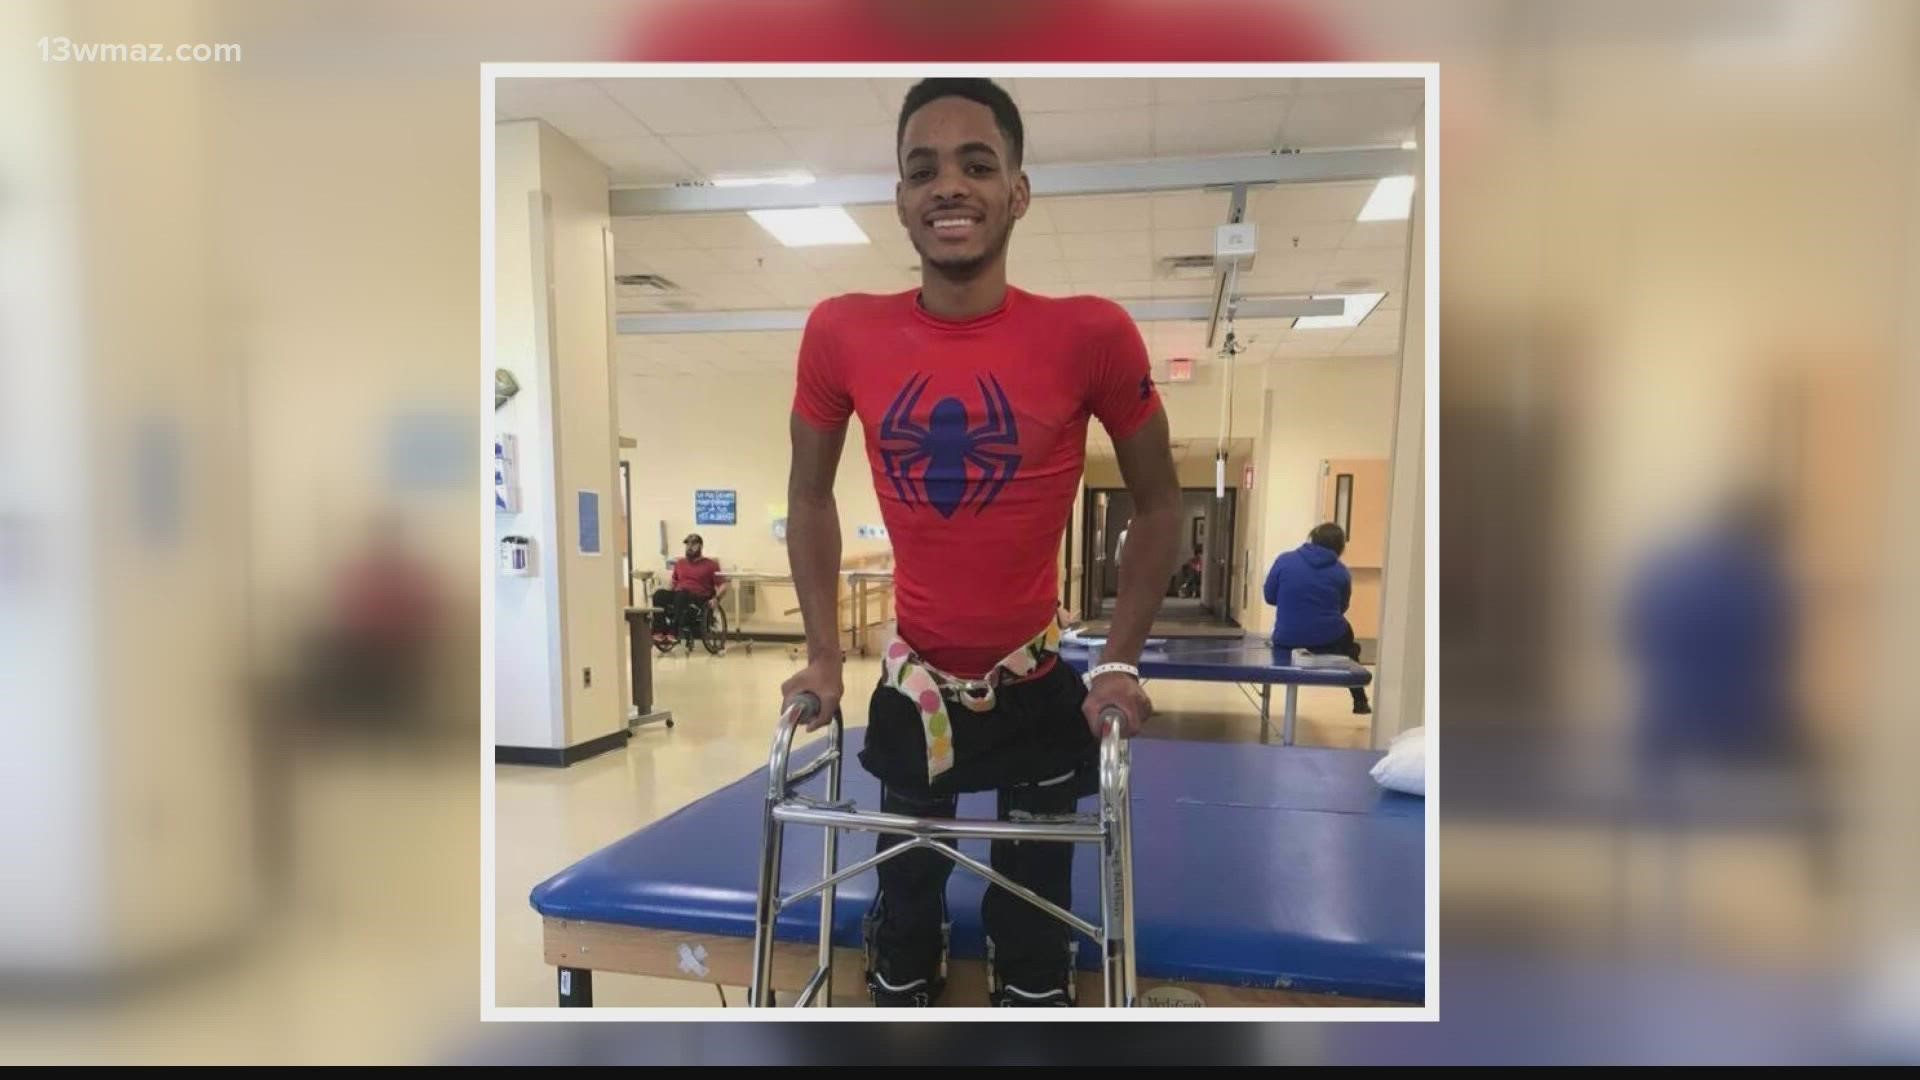 Back in 2017, Tre Lawson was involved in a car accident that left him paralyzed from the waist down. Through recovery Lawson has defied the odds.